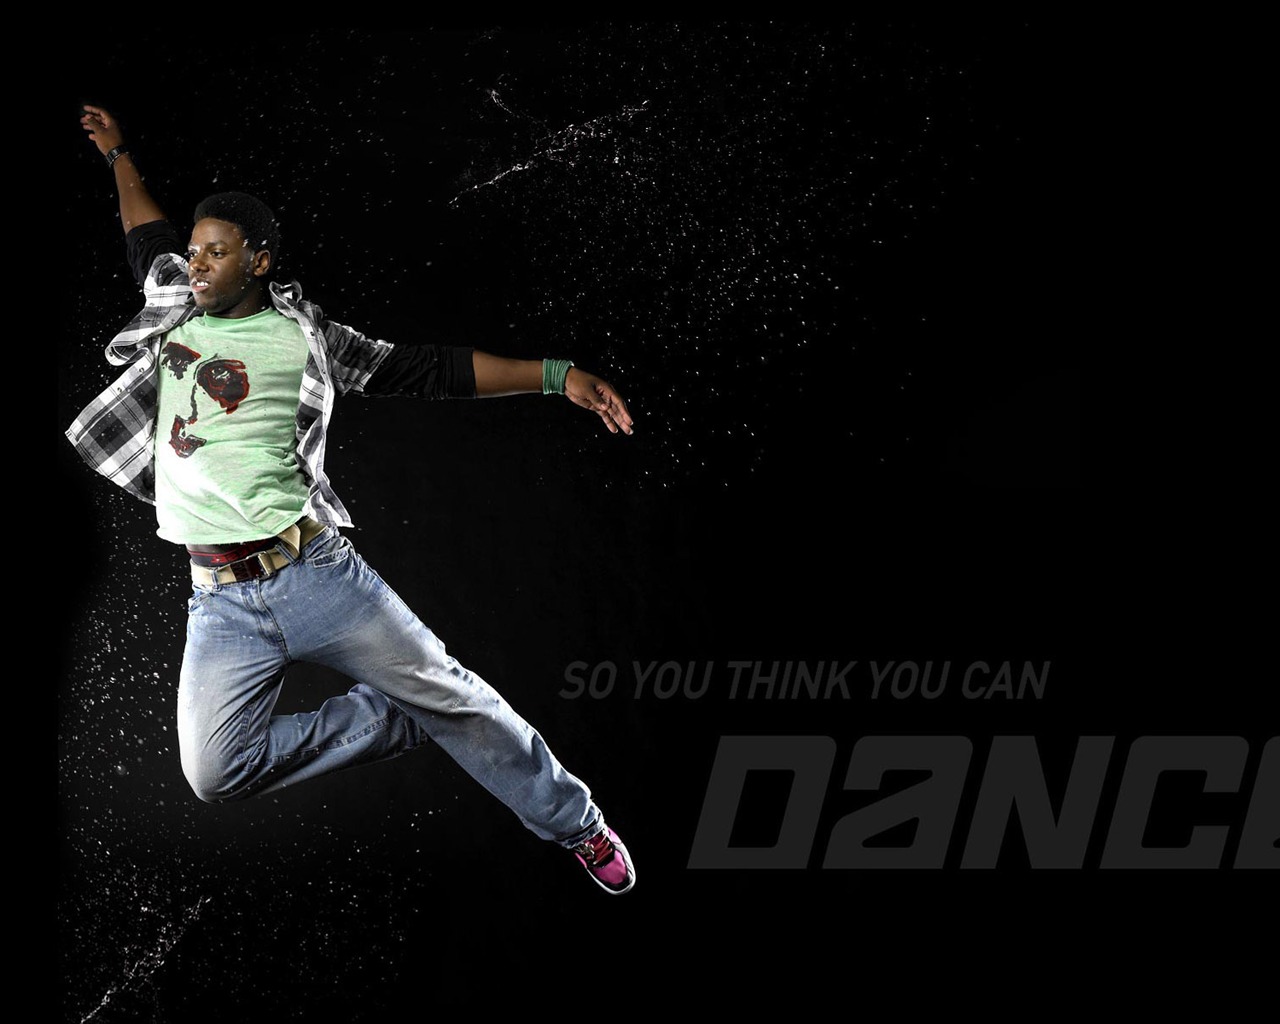 So You Think You Can Dance 舞林爭霸壁紙(一) #18 - 1280x1024